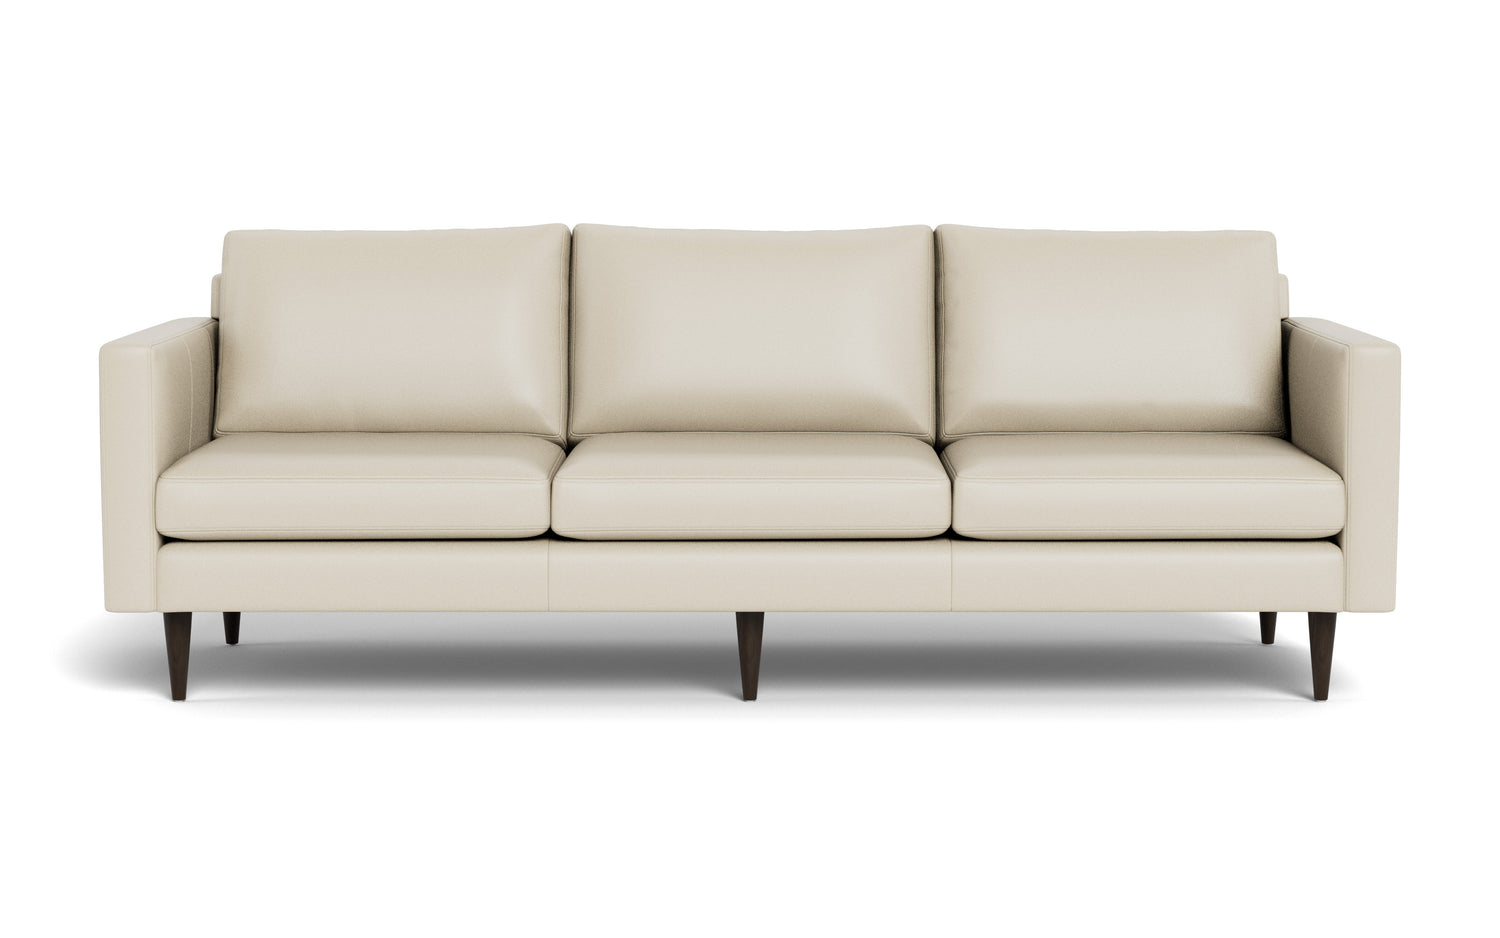 The Wallace Untufted Estate Sofa